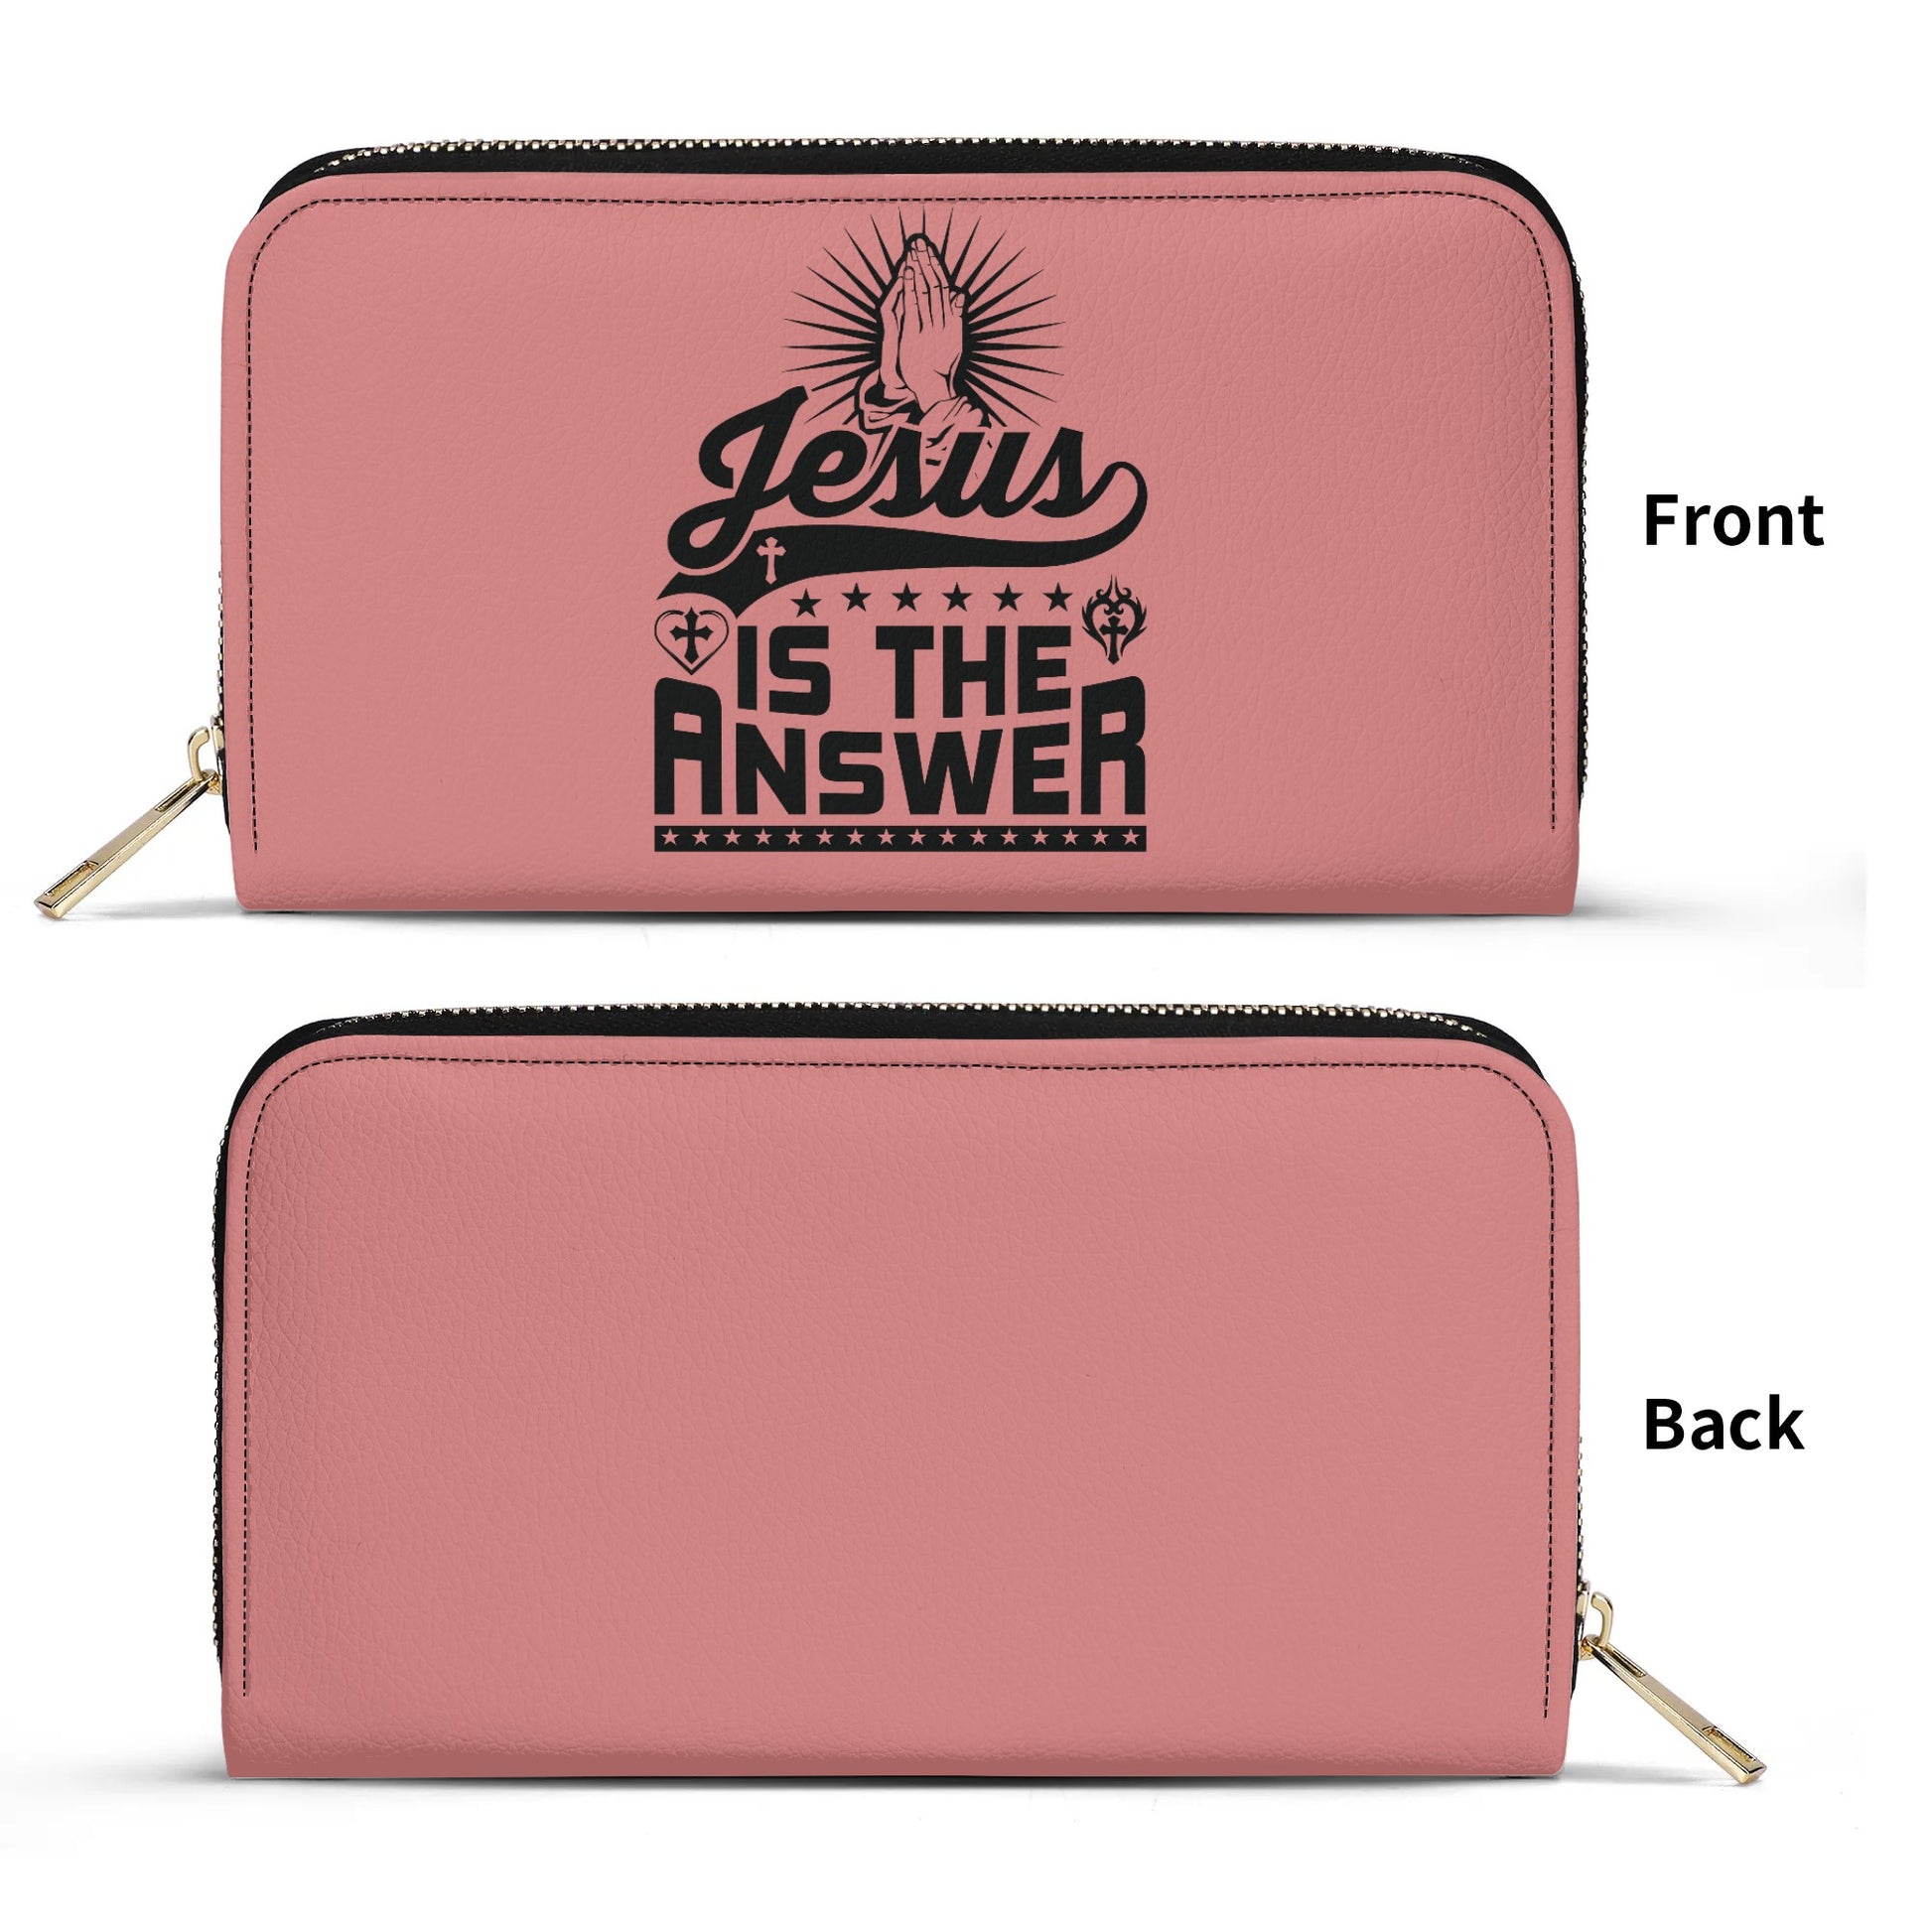 Jesus Is The Answer PU Leather Womens Christian Wallet popcustoms